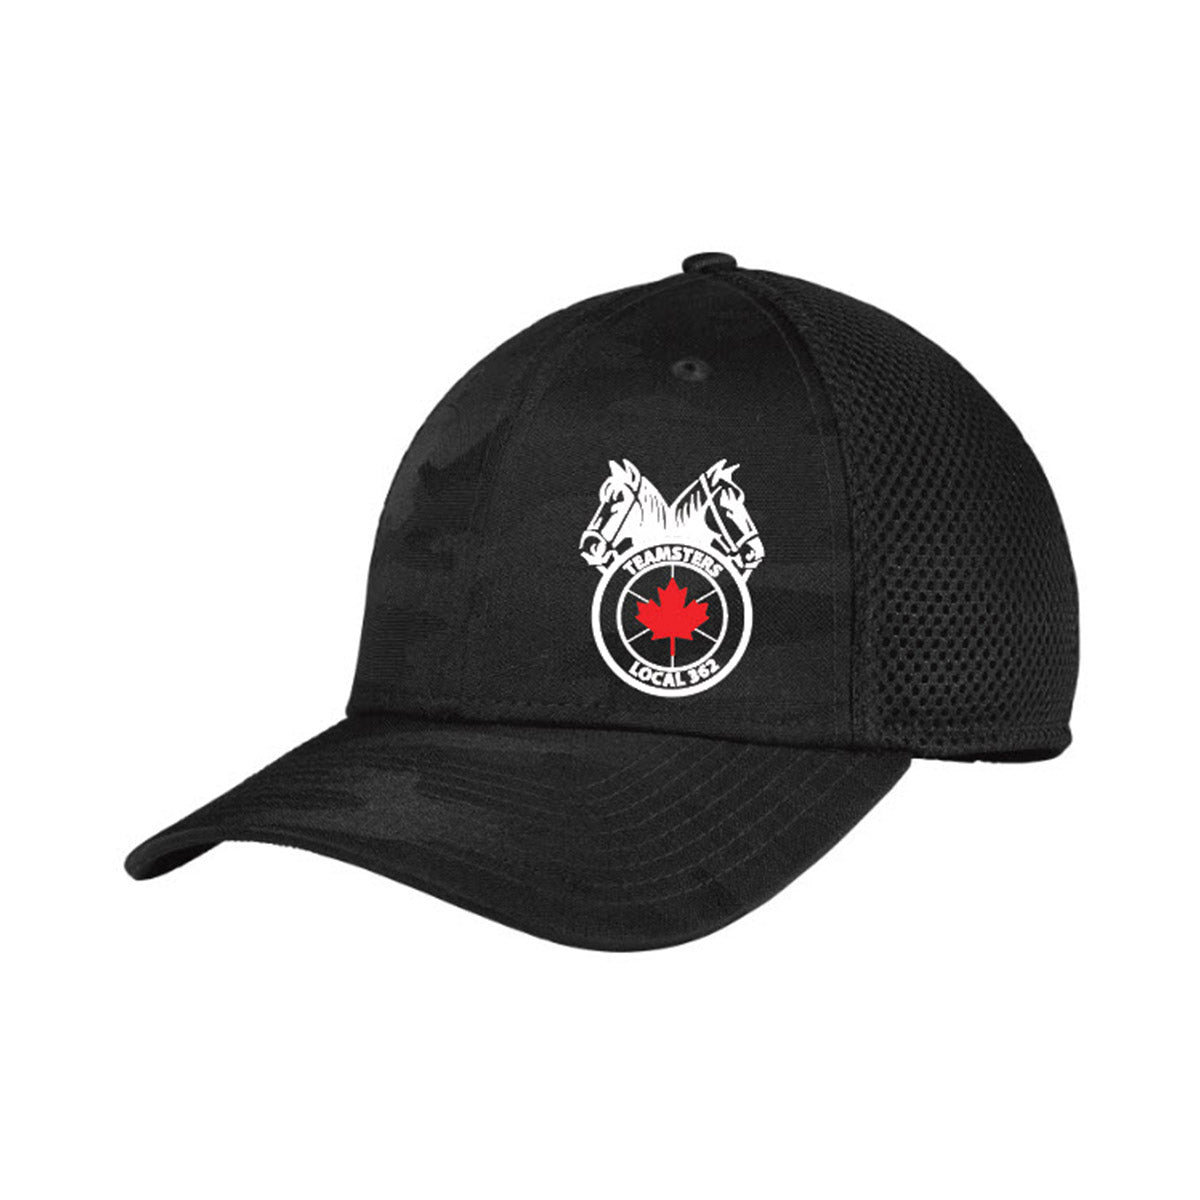 Teamsters 362 - Tonal Camo Cap - White & Red Embroidery